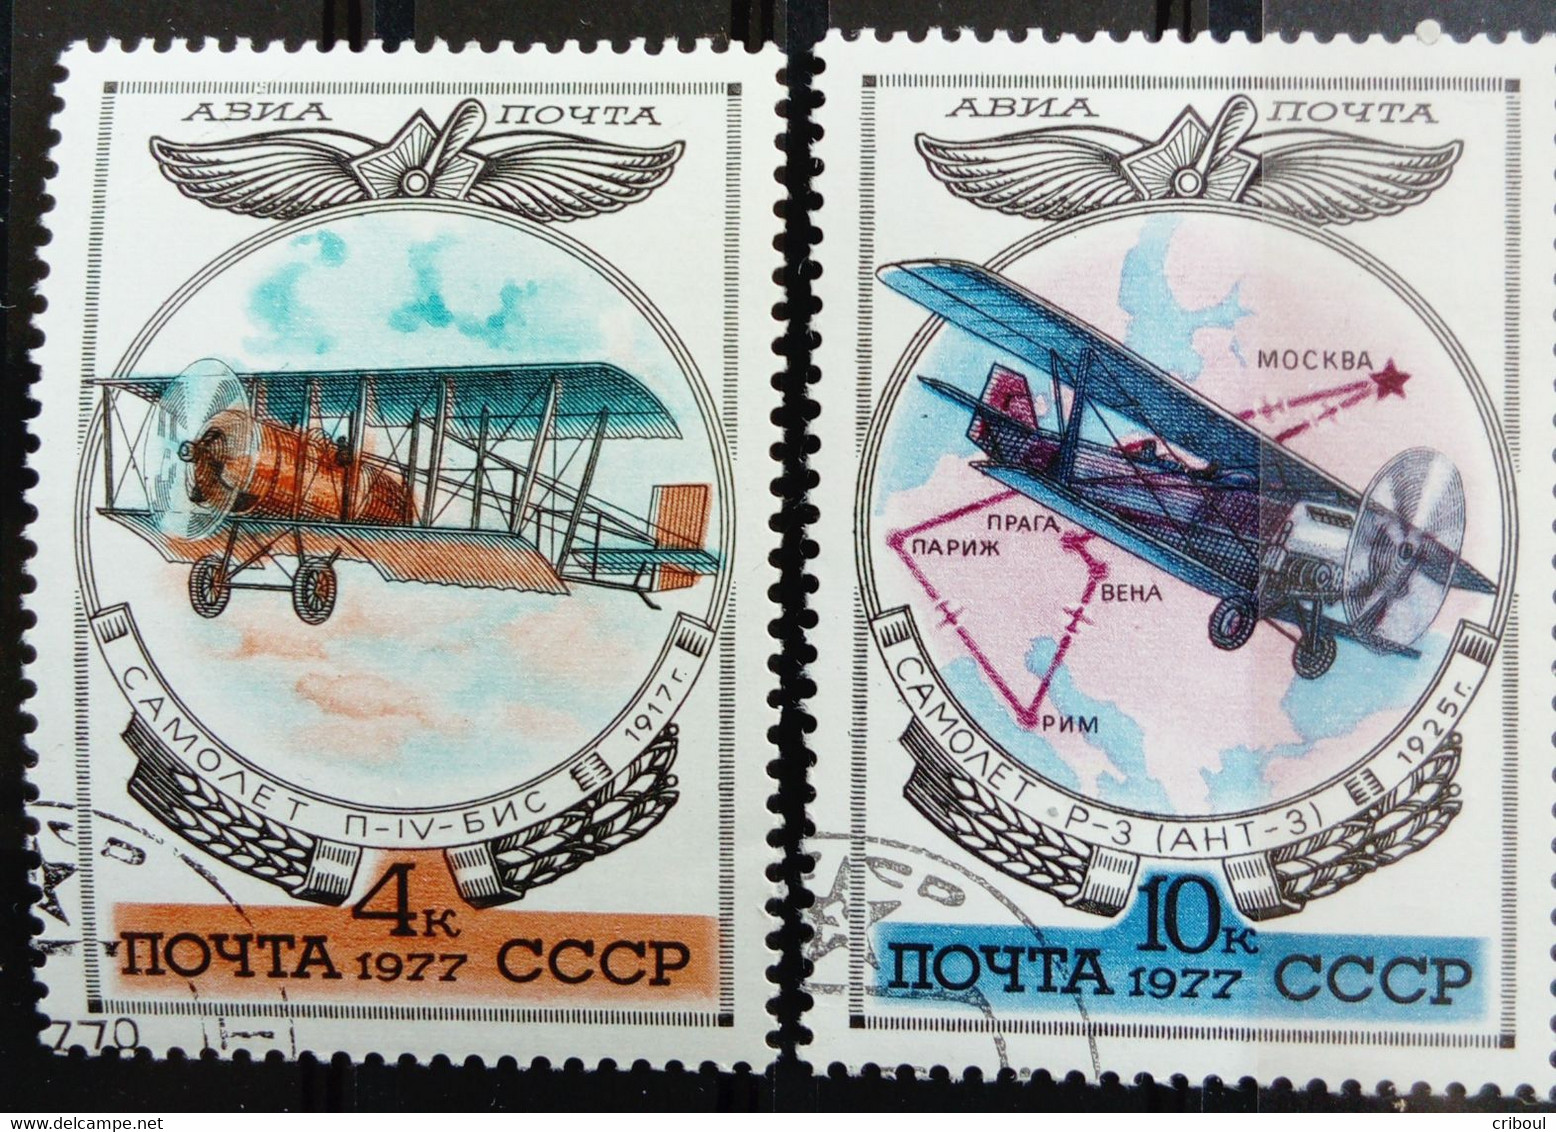 Russie Russia URSS USSR 1977 Avion Airplane Yvert PA124 126 O Used - Oblitérés